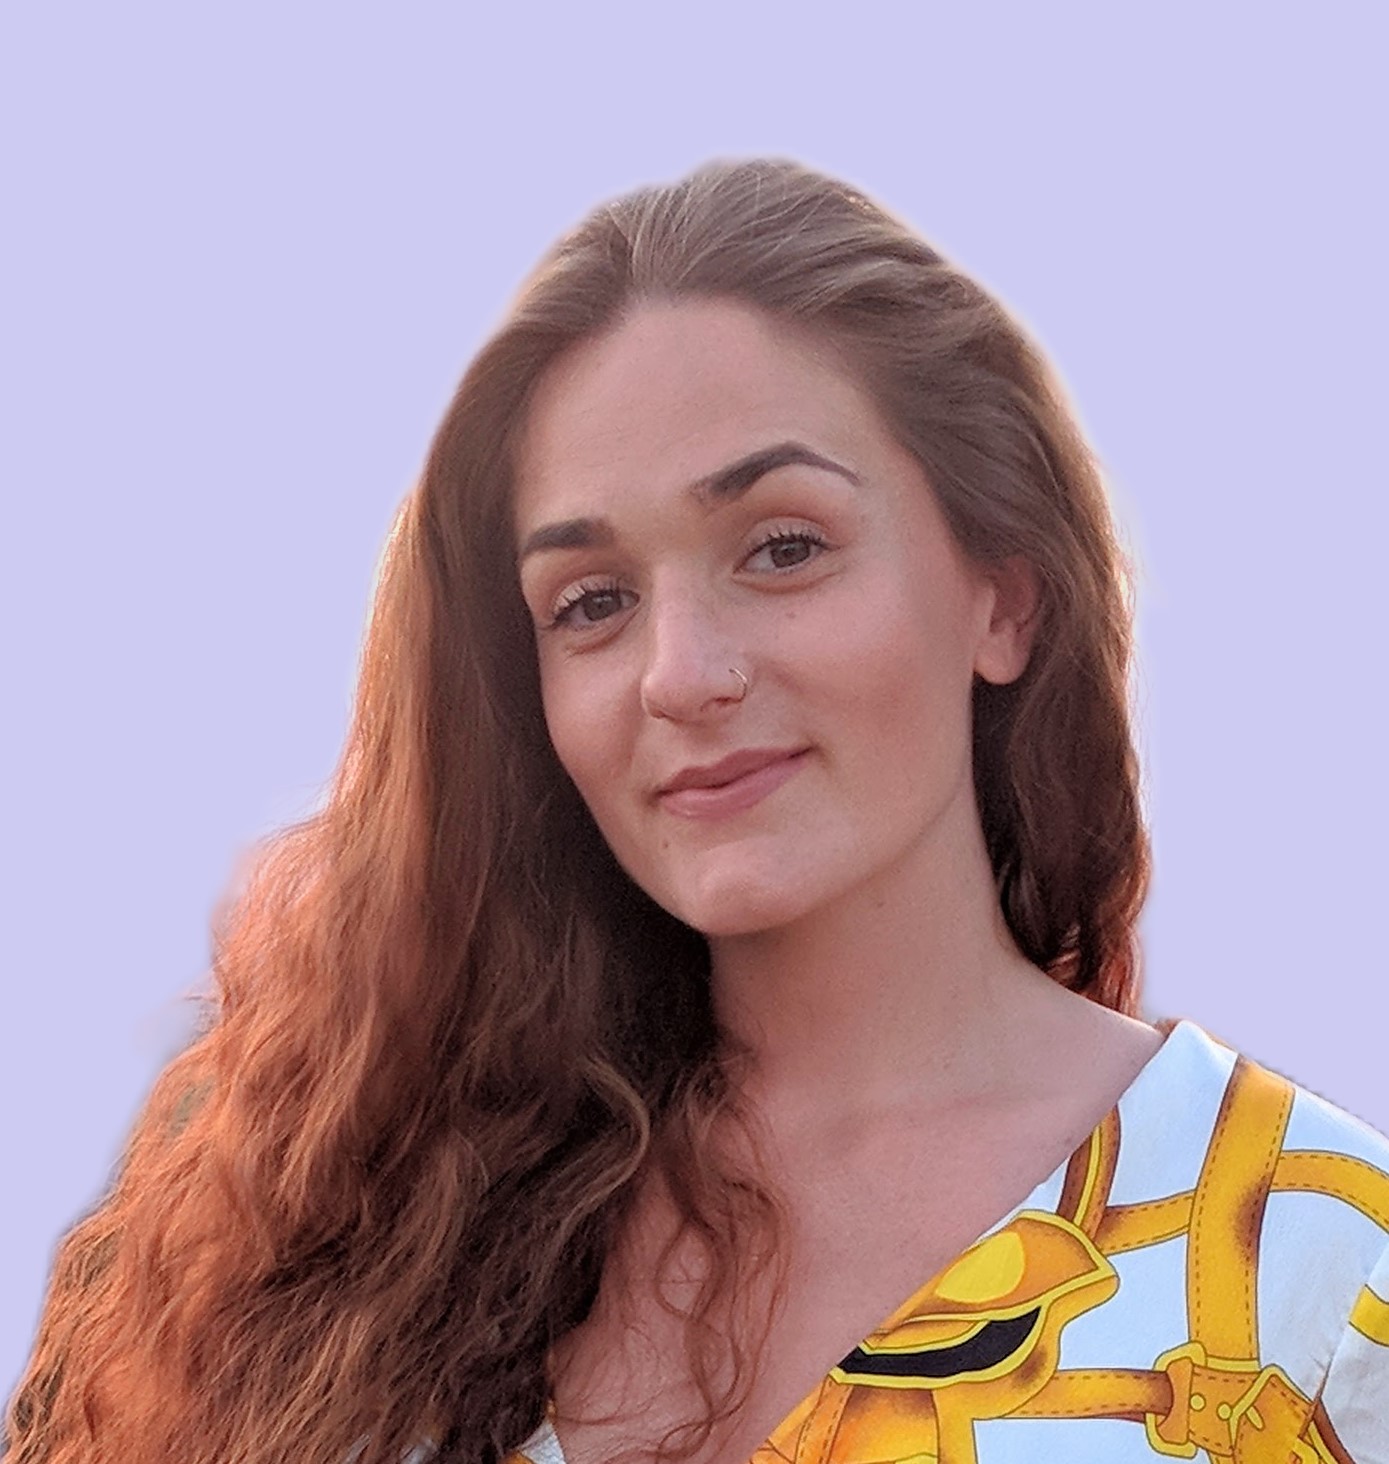 Harriet is our Marketing & Communications Officer responsible for GBC's marketing, events, PR and communications, elevating the organisation's impact and visibility.